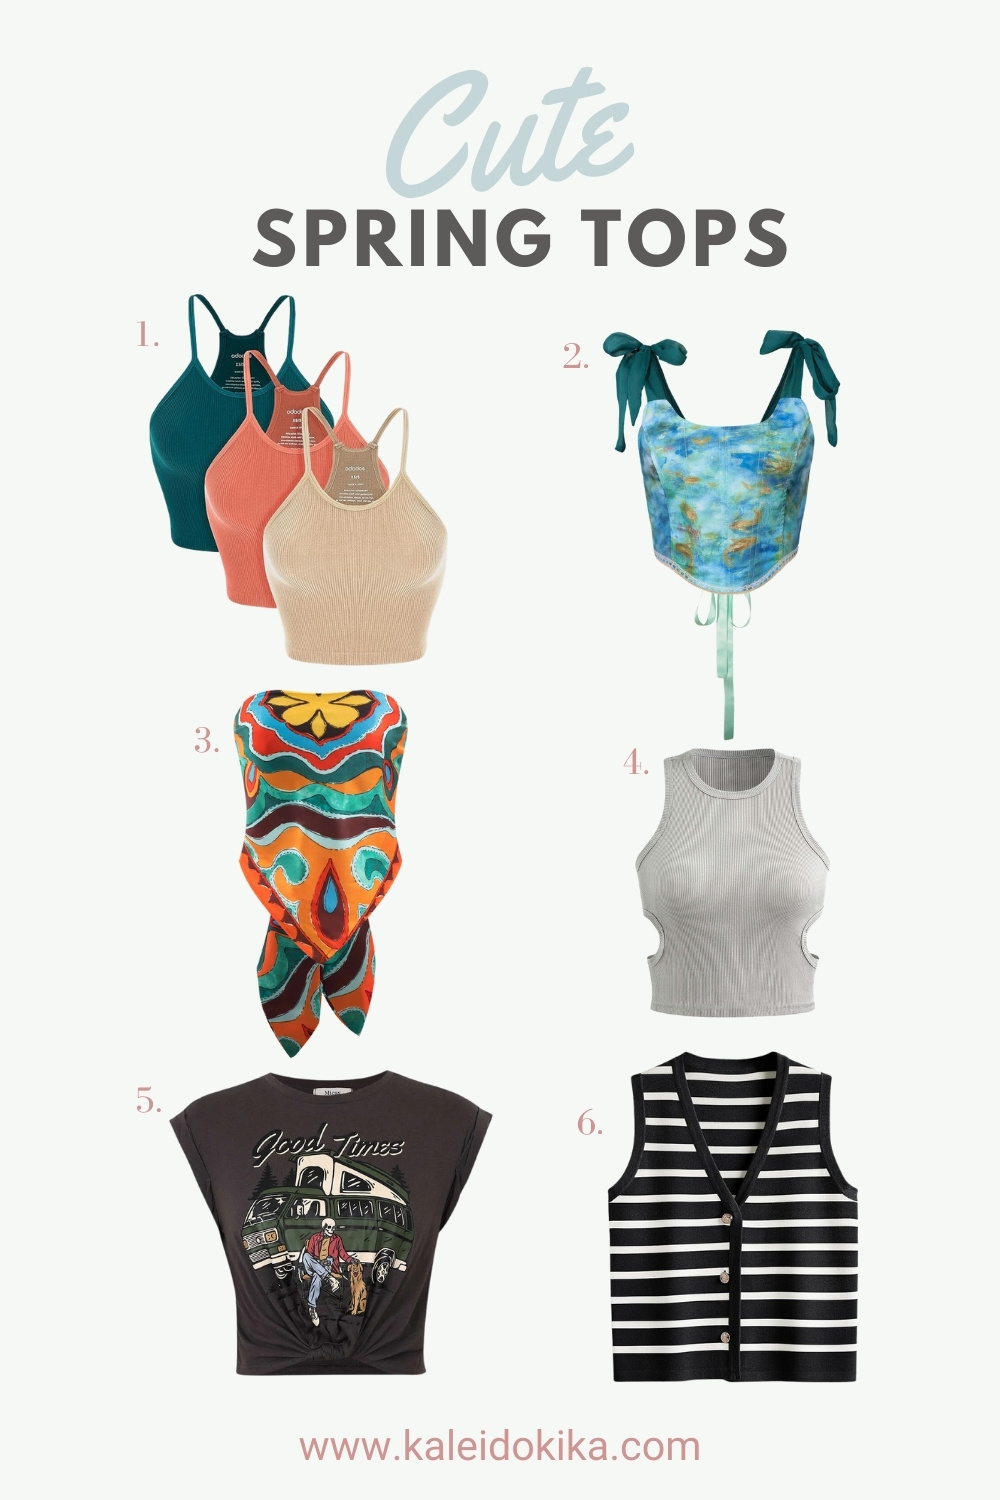 Image showing 6 cute tops for spring